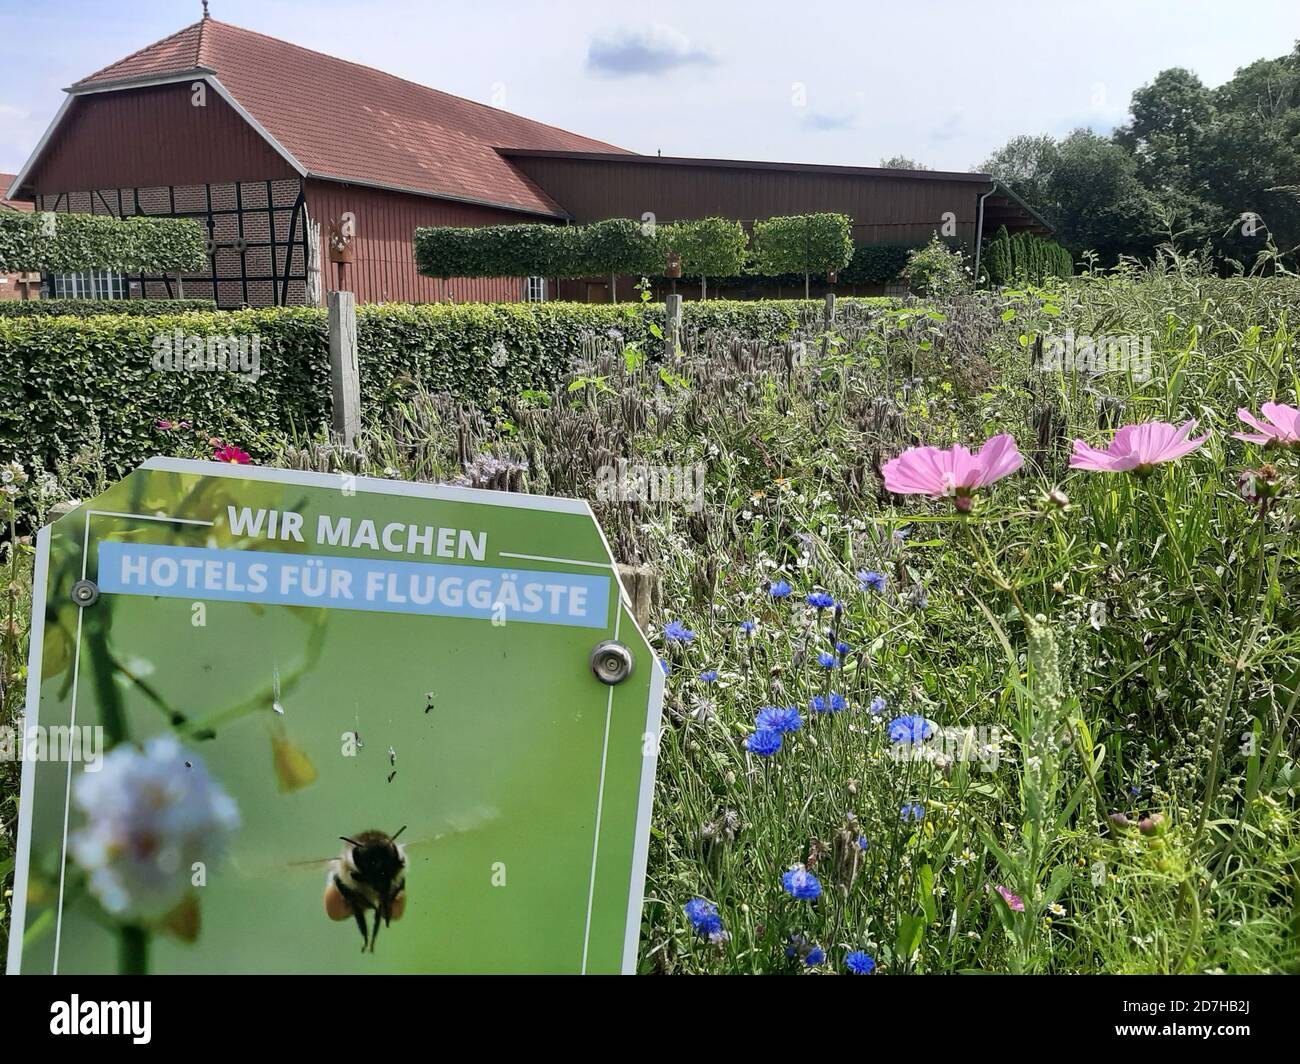 image campaign of a farmer, advertisement for planting nectar plants for insects, Germany Stock Photo